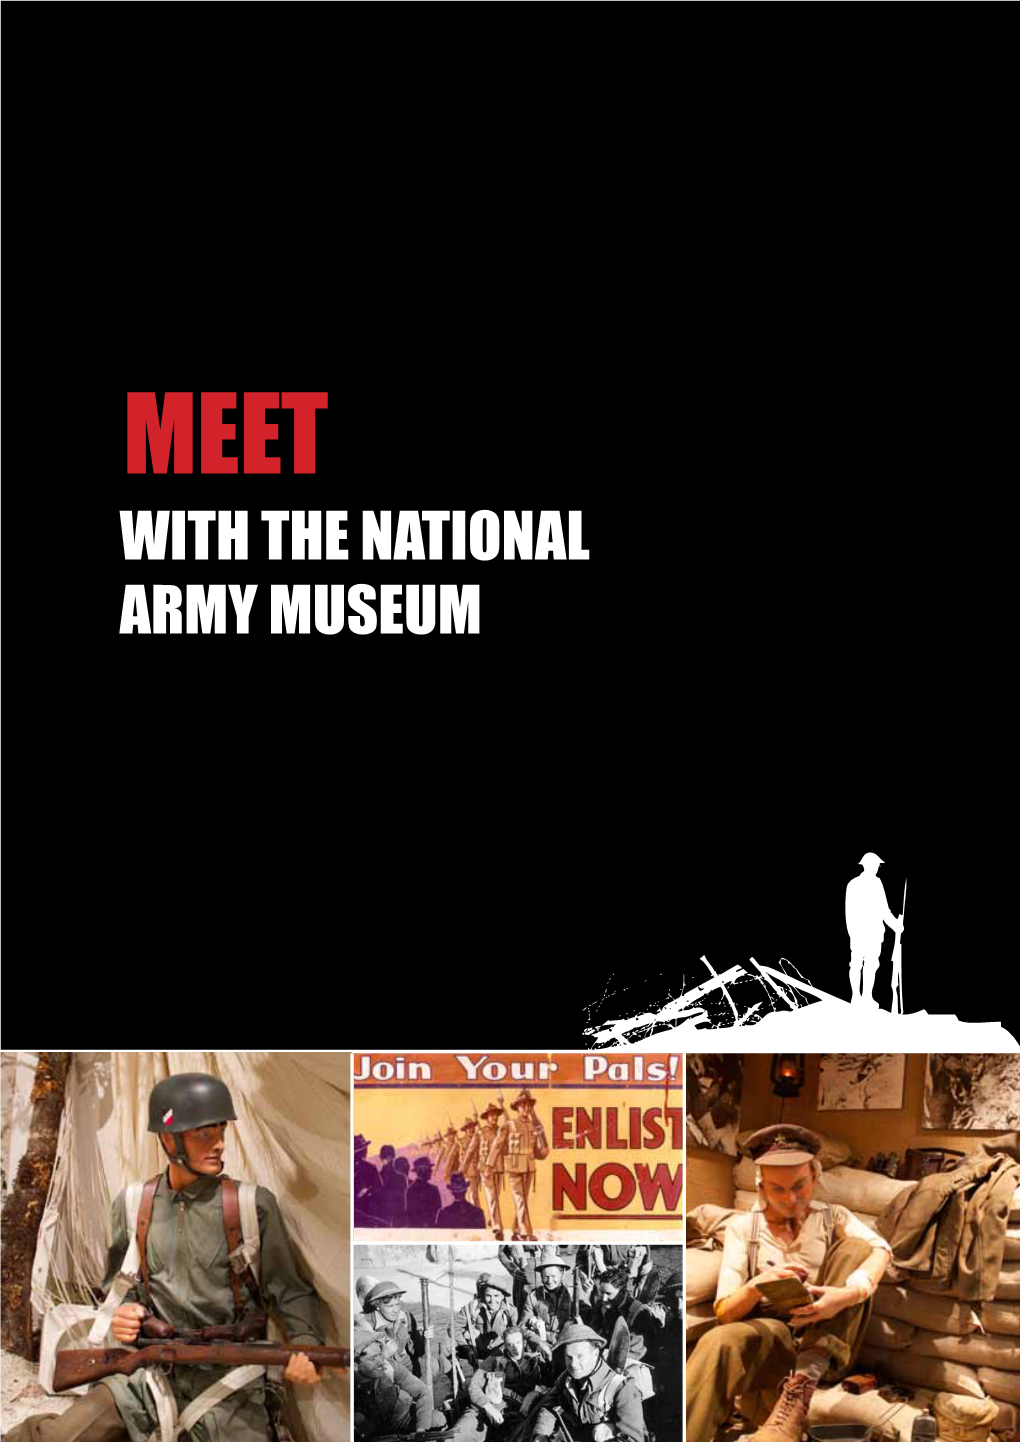 With the National Army Museum Meet - National Army Museum